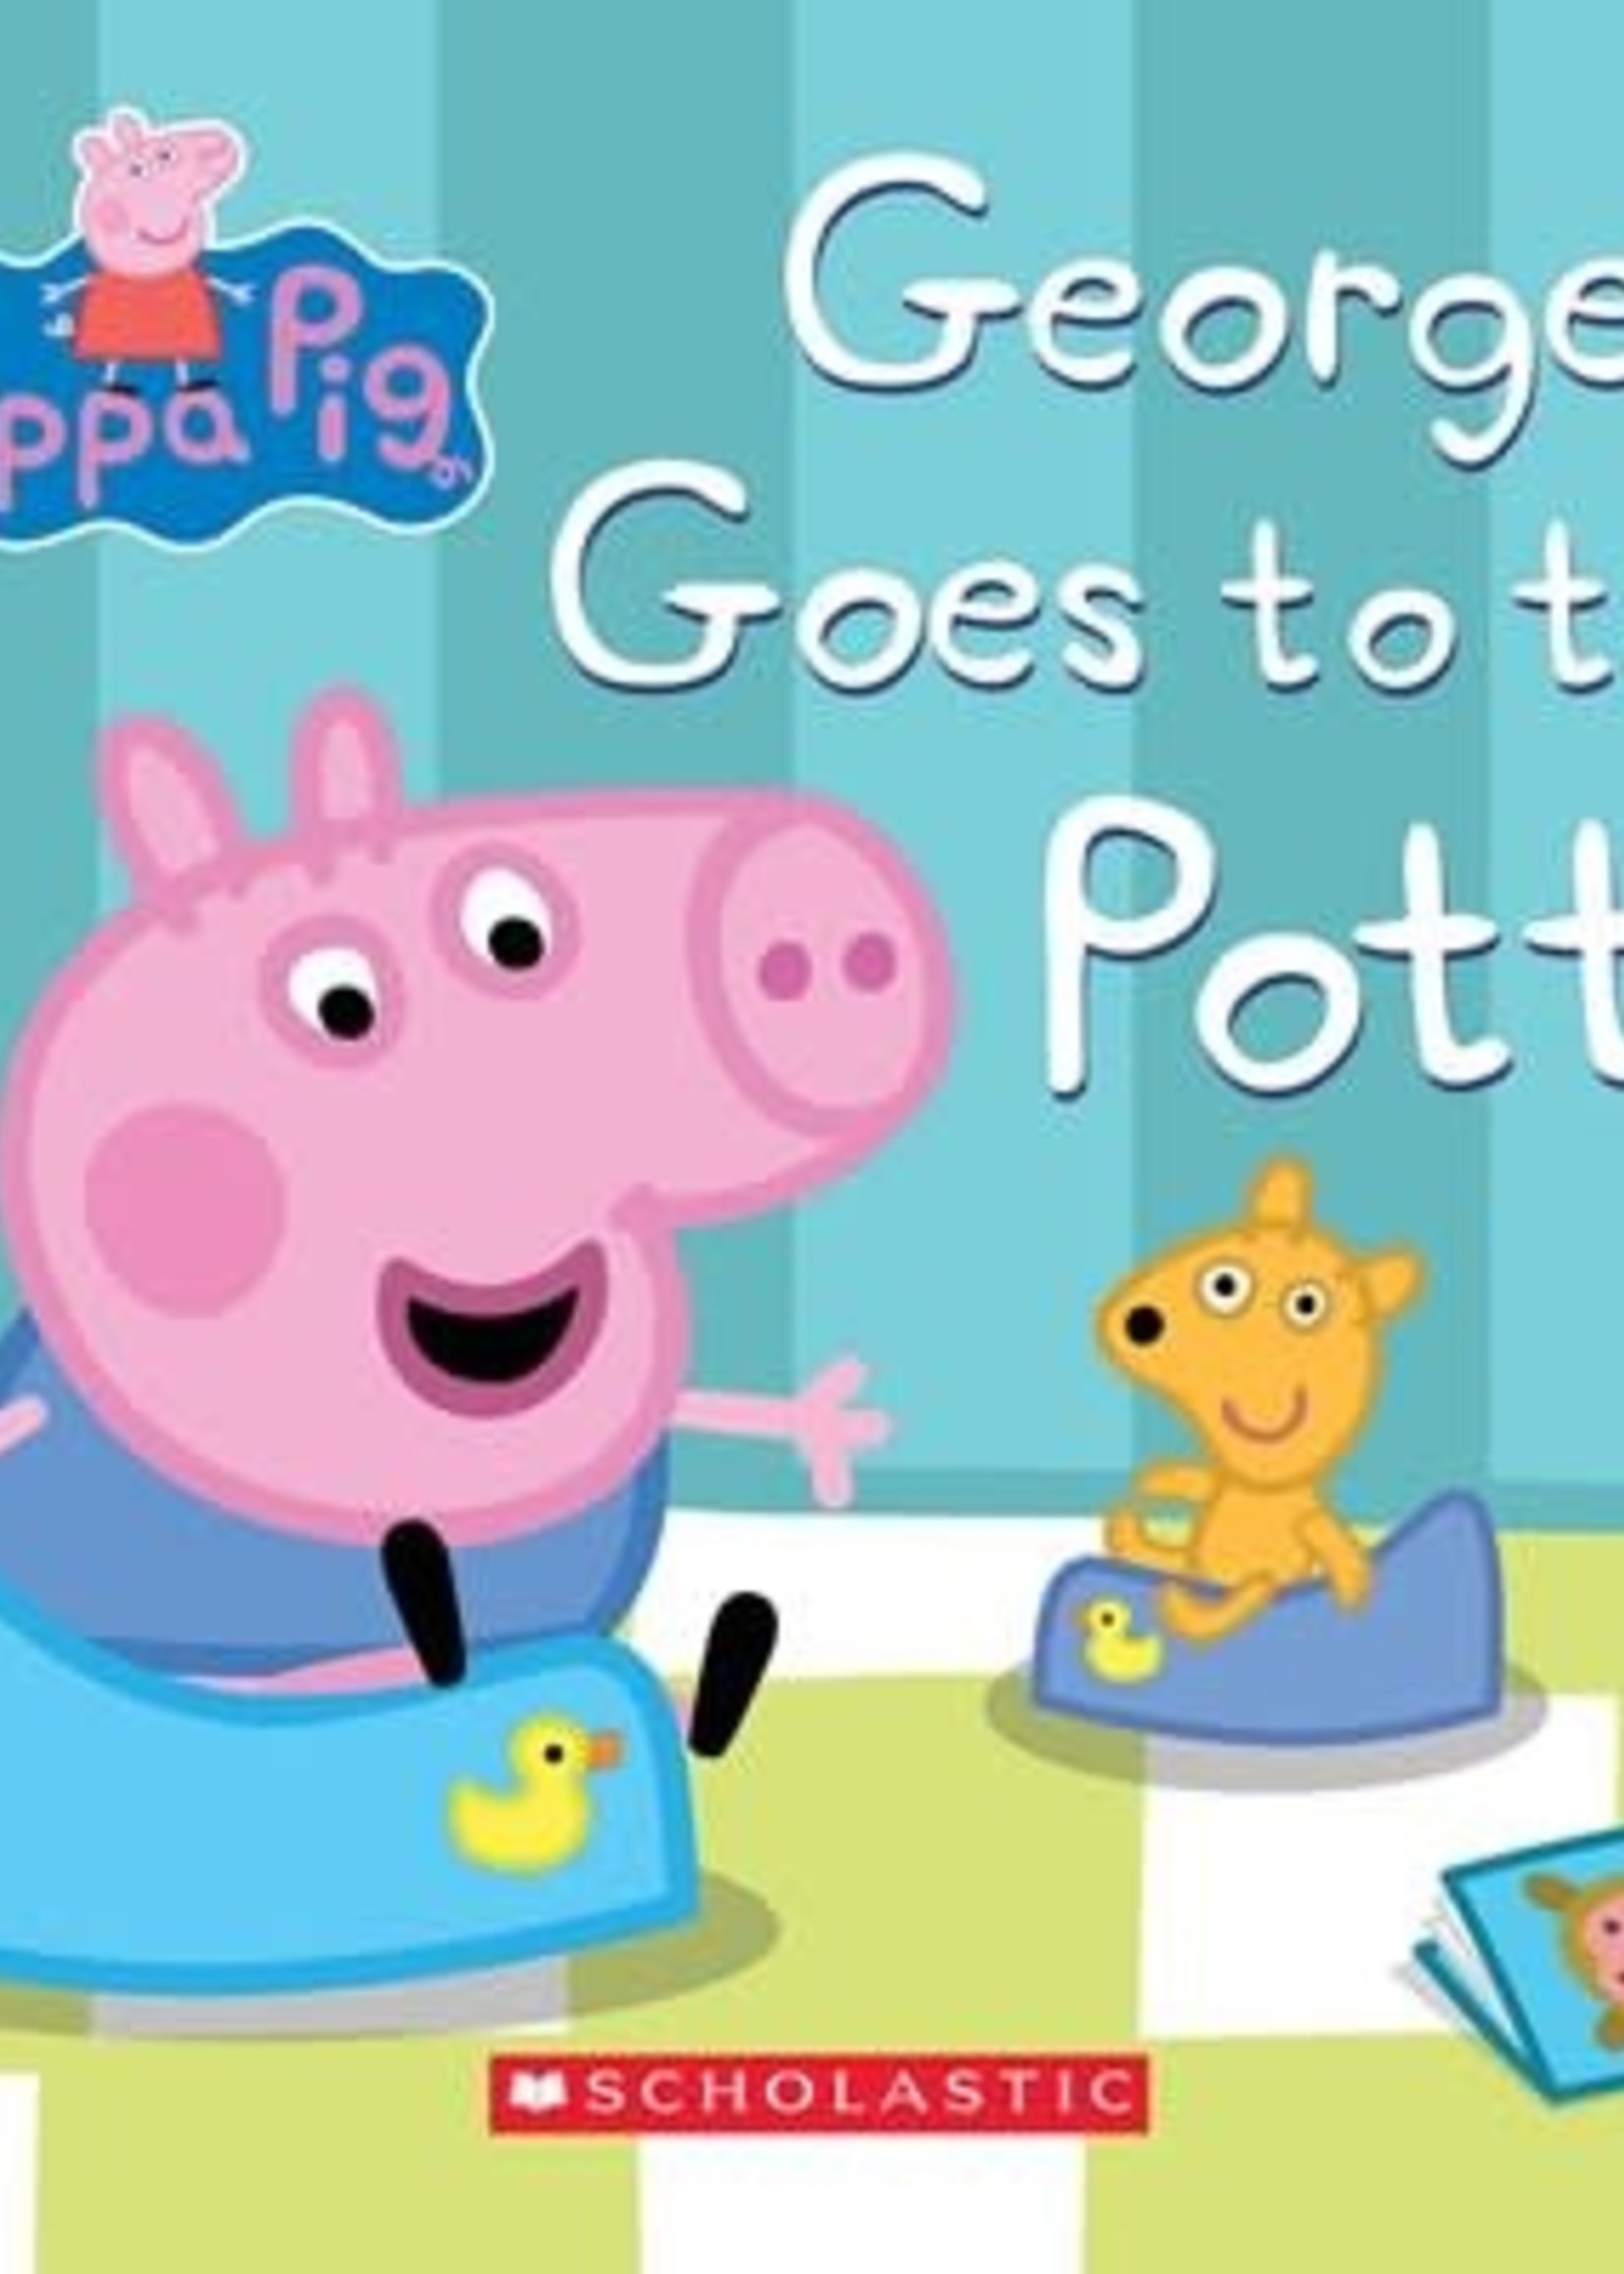 Peppa Pig George Goes to the Potty BB